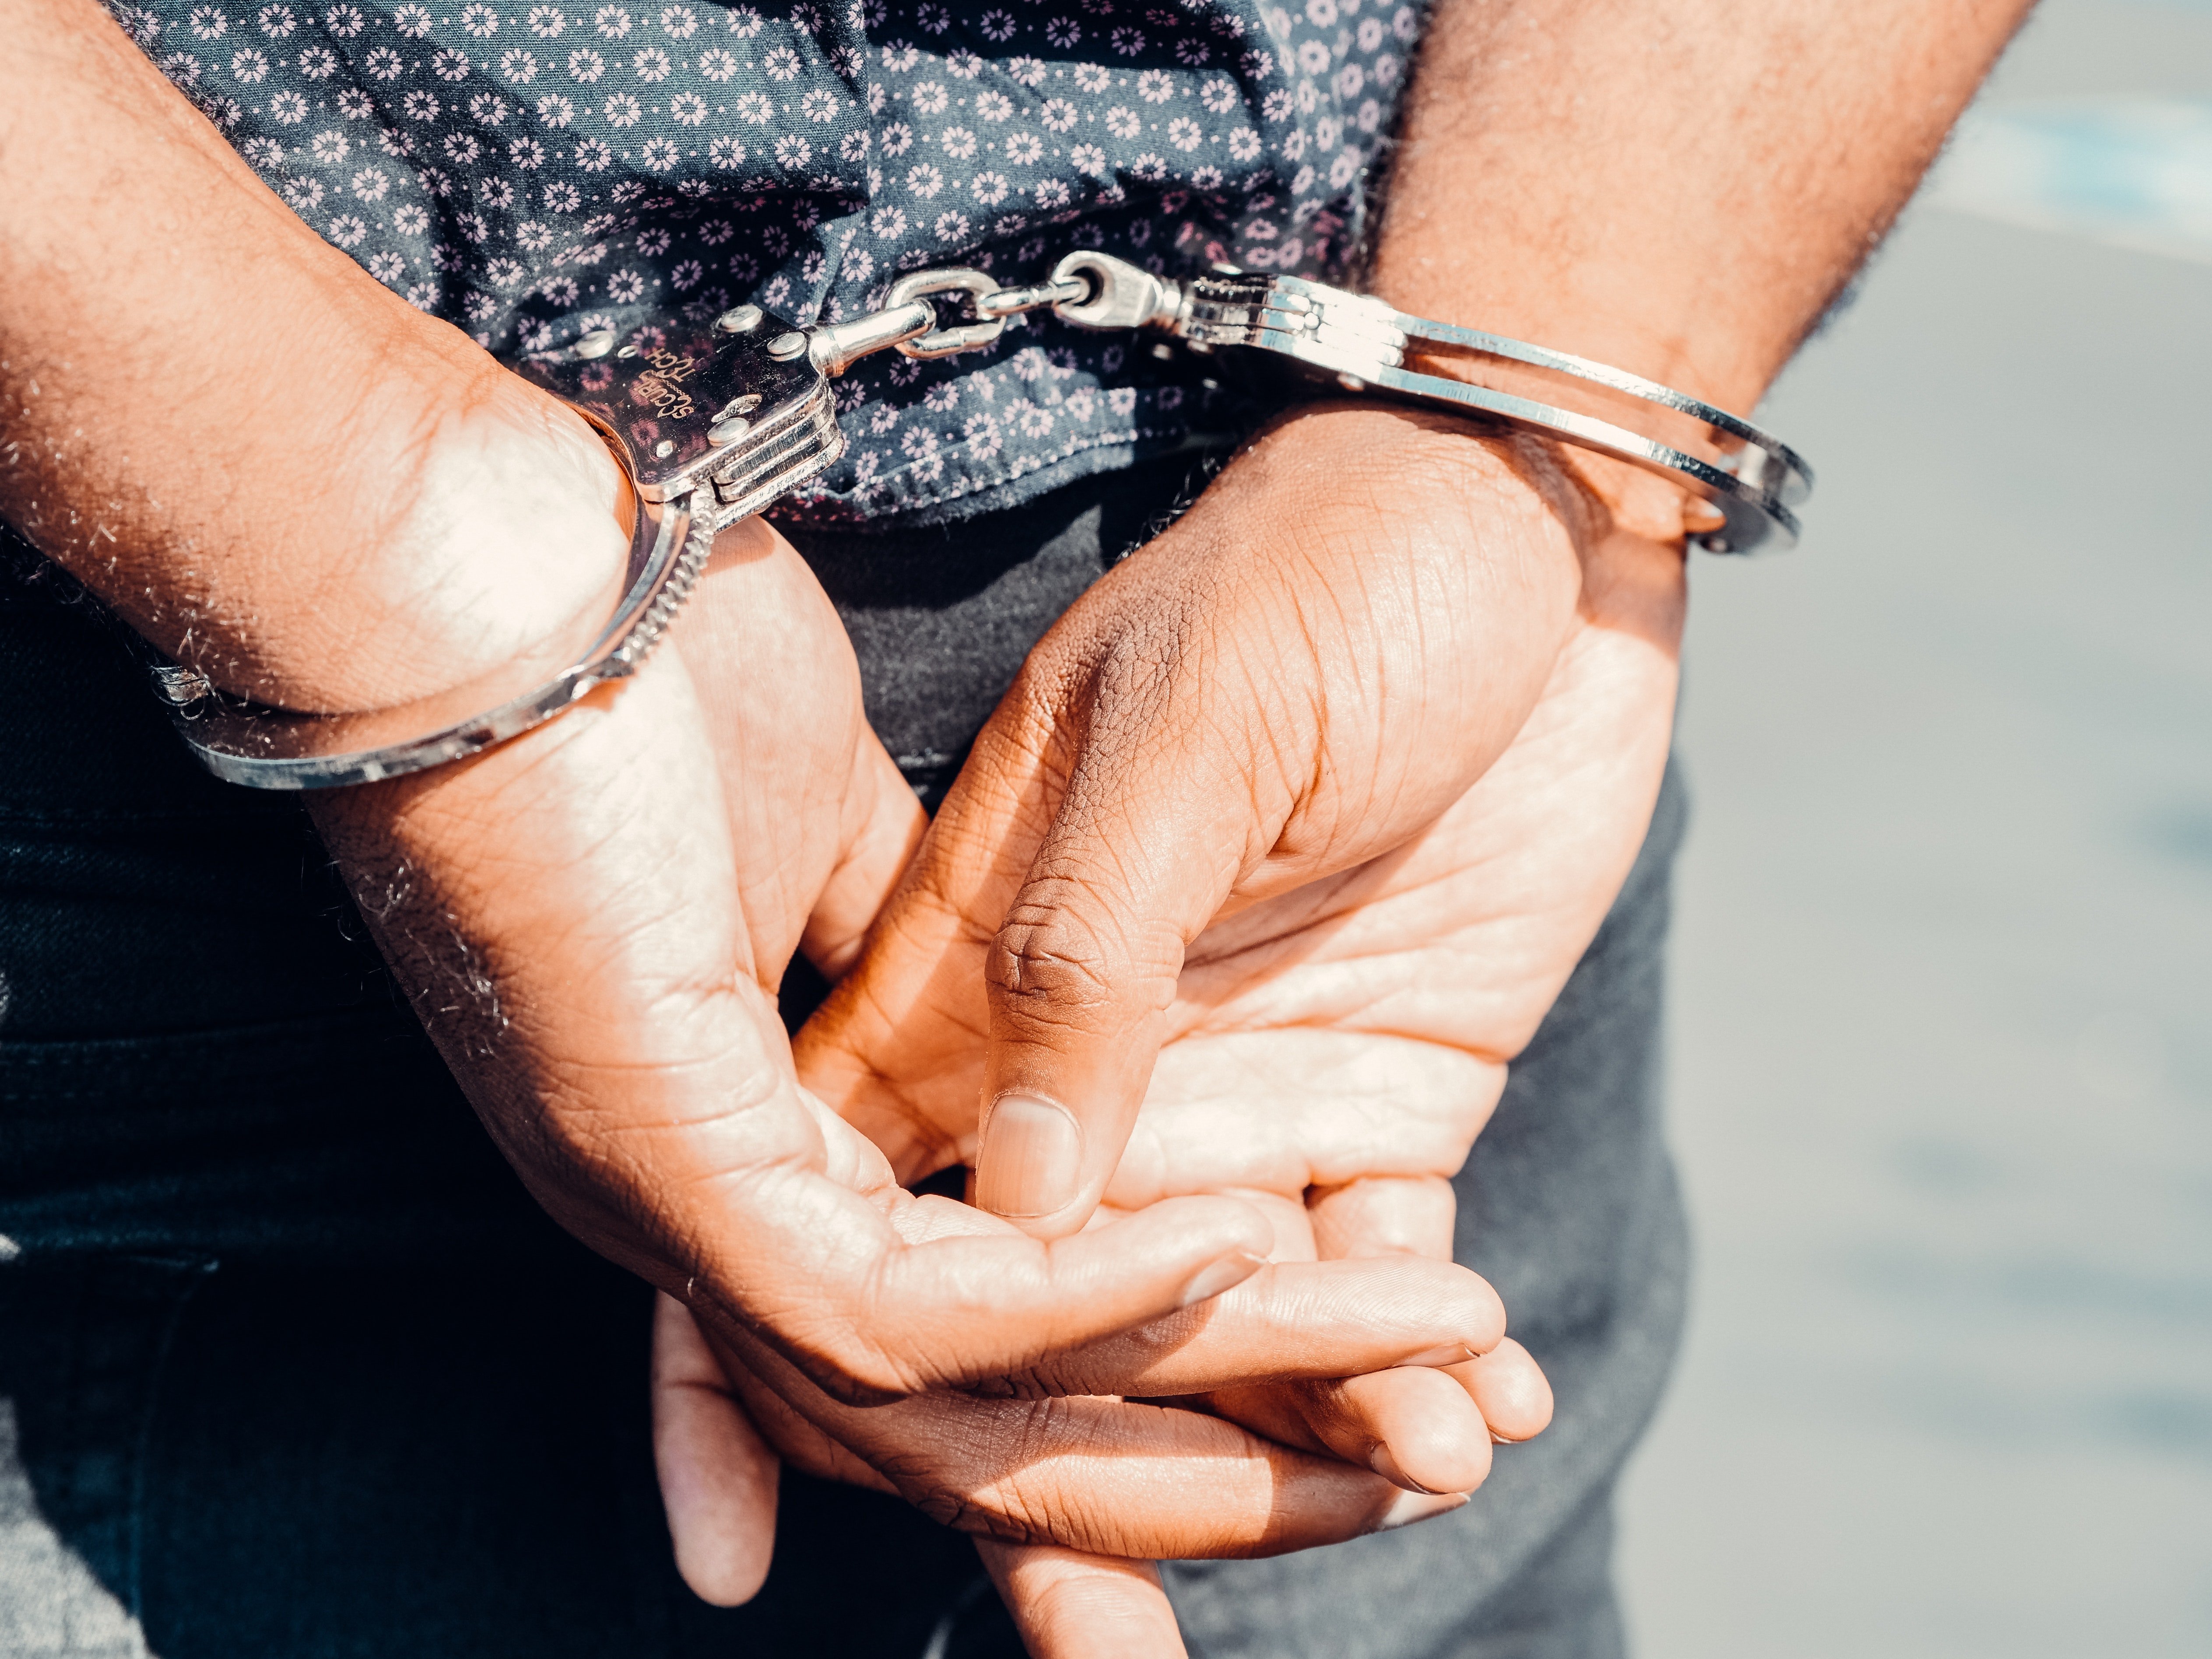 Gary was arrested for attempted murder. | Source: Pexels